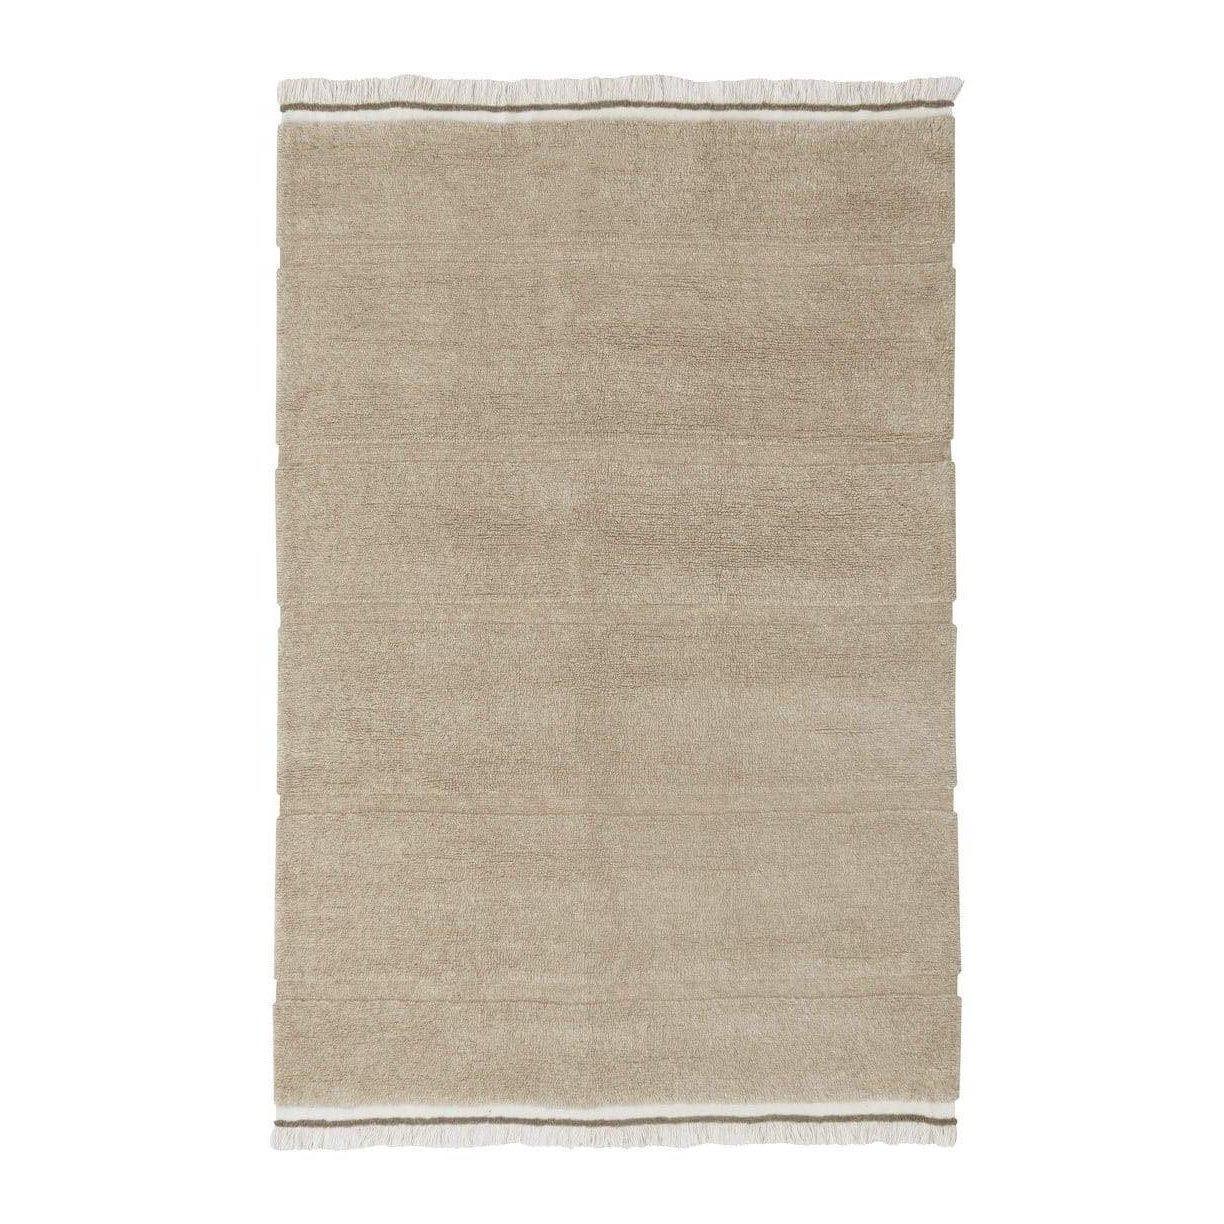 Lorena Canals Steppe Beige Woolable Area Rug